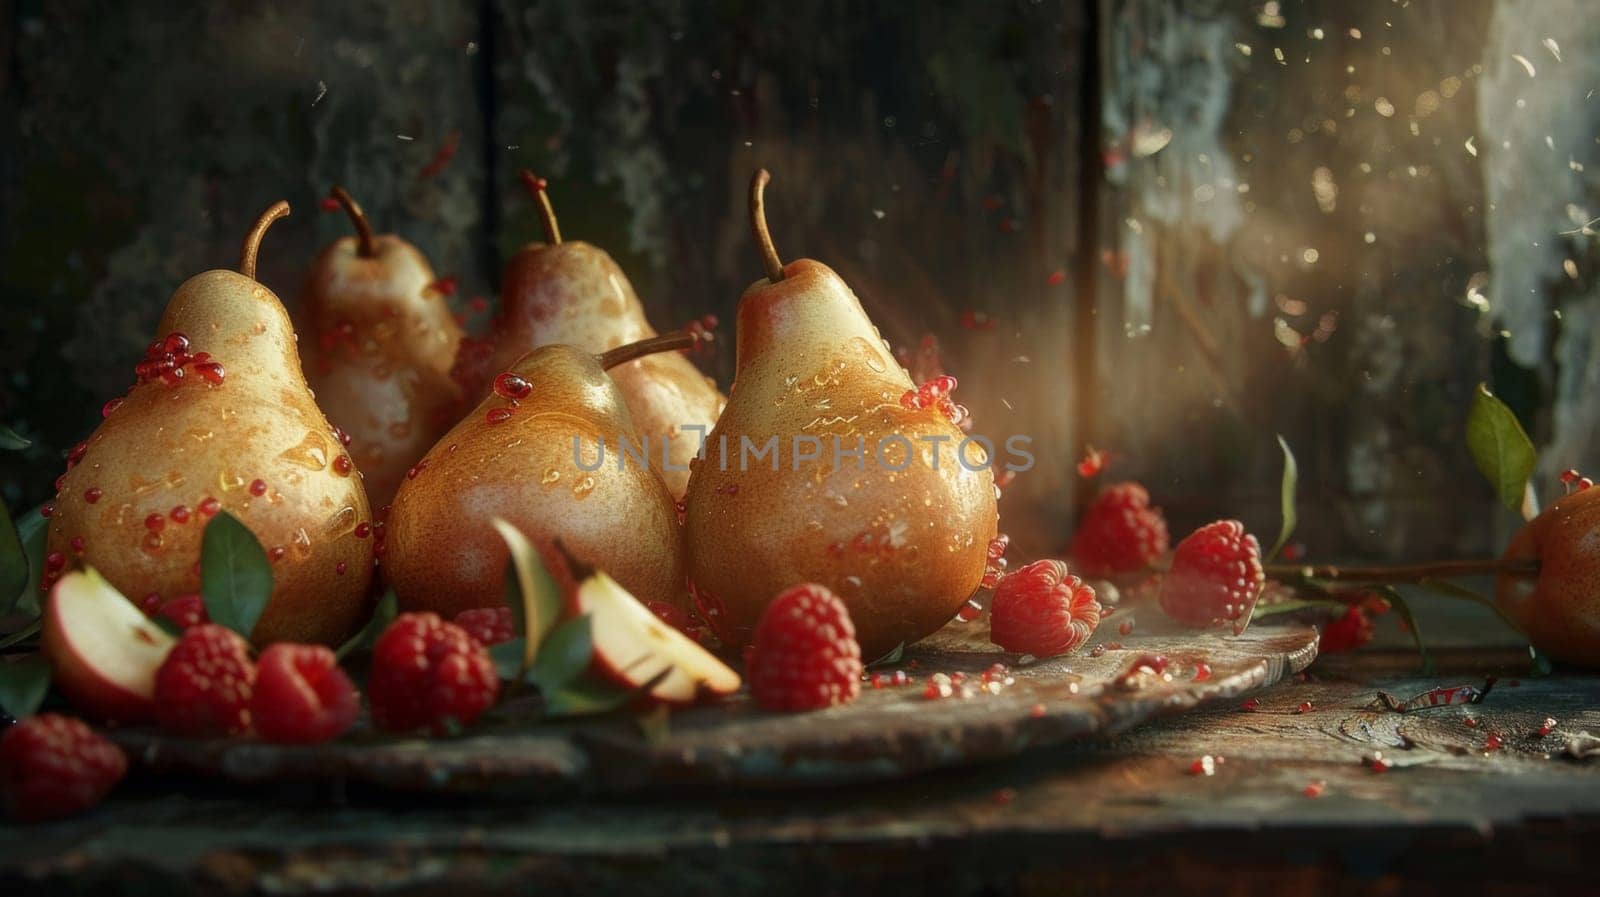 A bunch of pears and raspberries on a plate with water, AI by starush